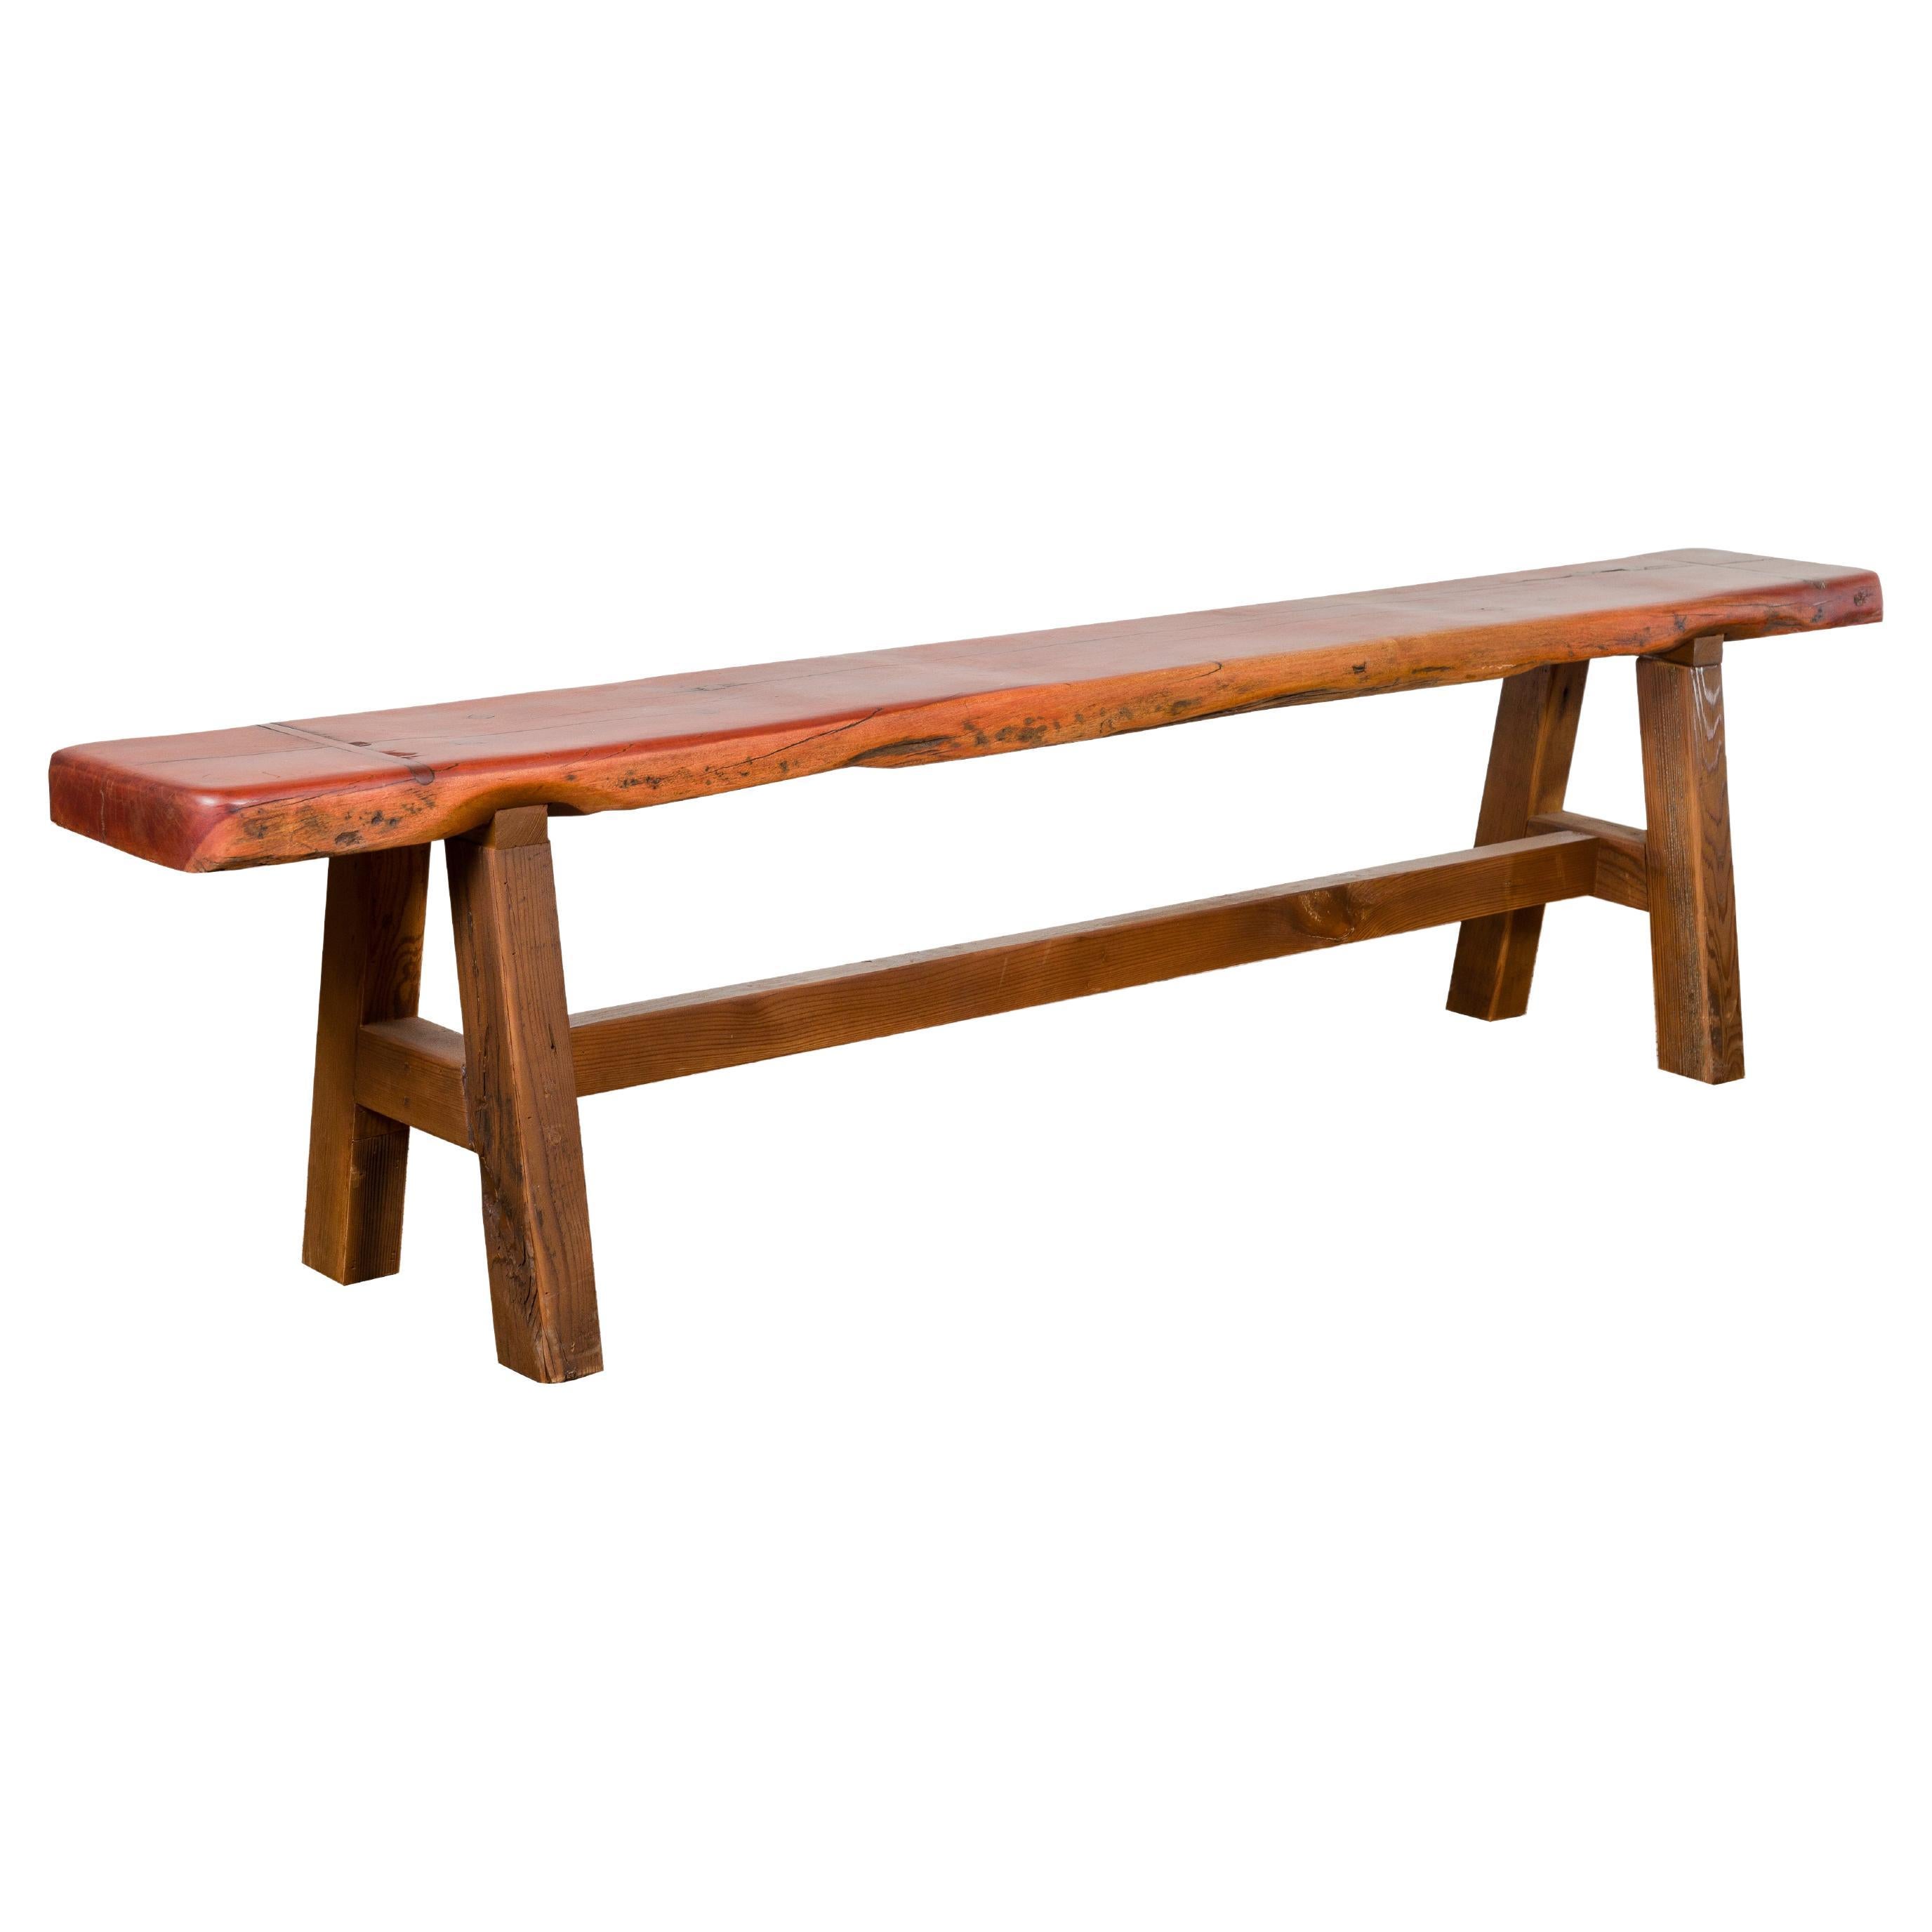 Mingei Style Rustic A-Frame Wooden Bench Made of Railroad Ties with Stretcher